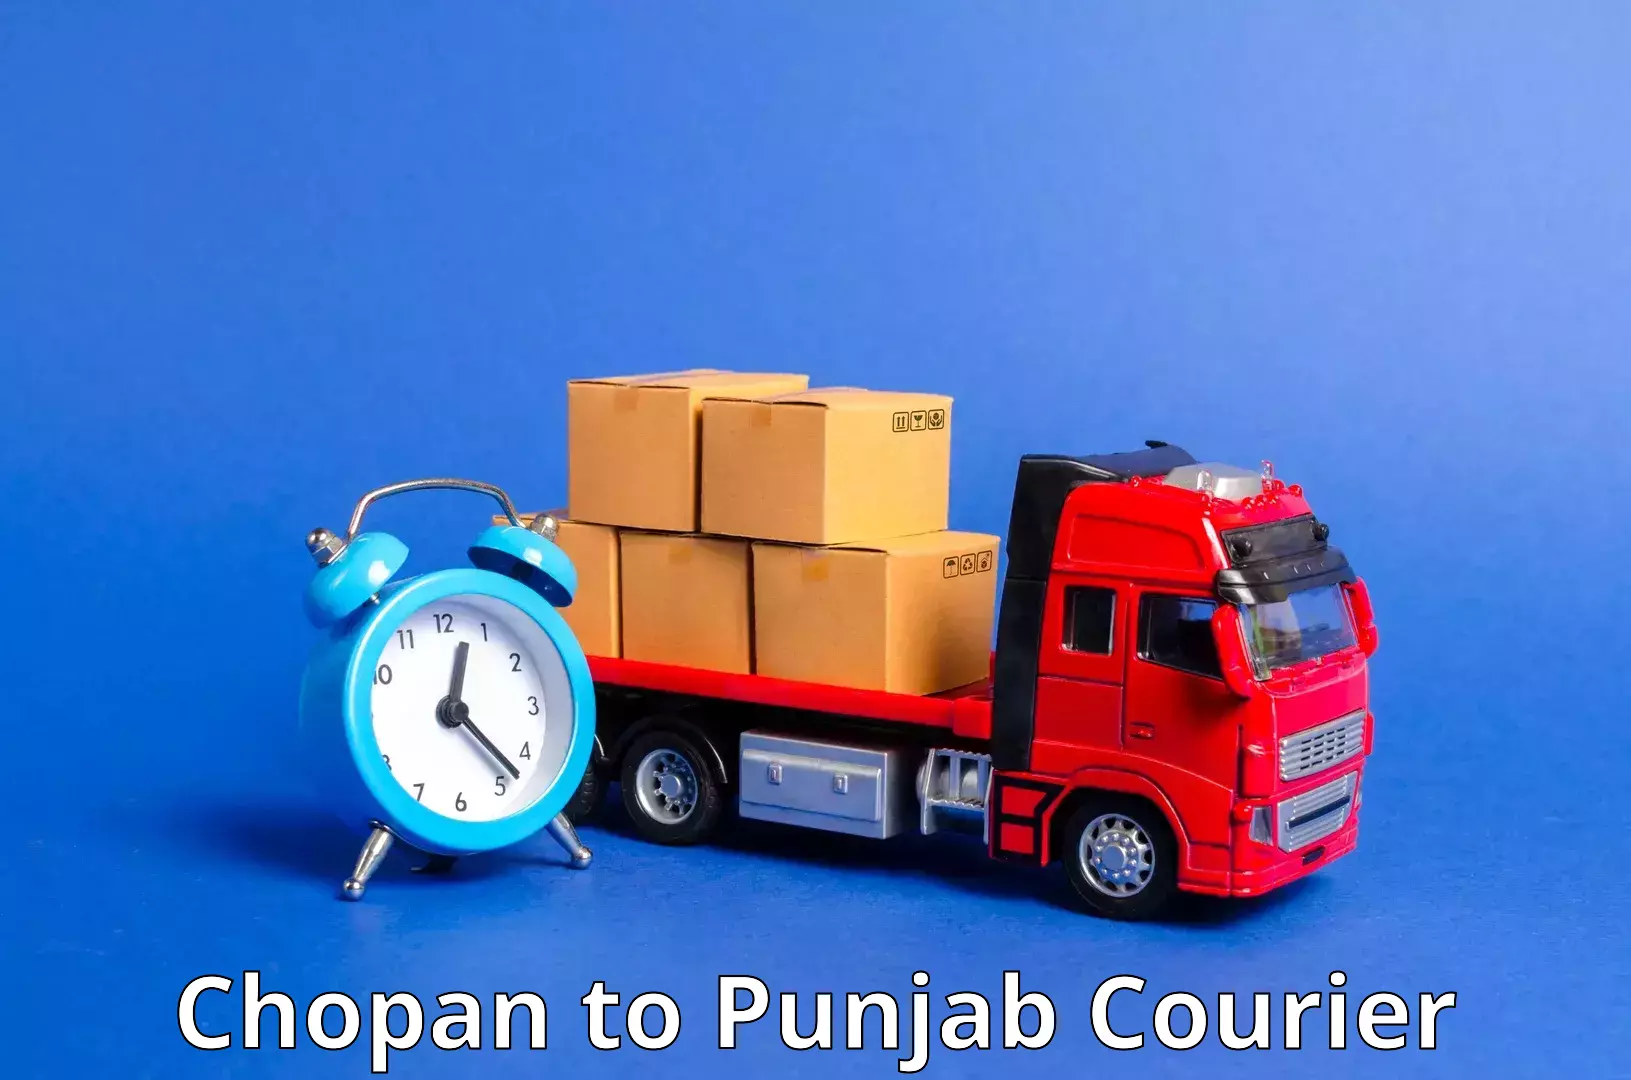 Nationwide courier service Chopan to Ludhiana